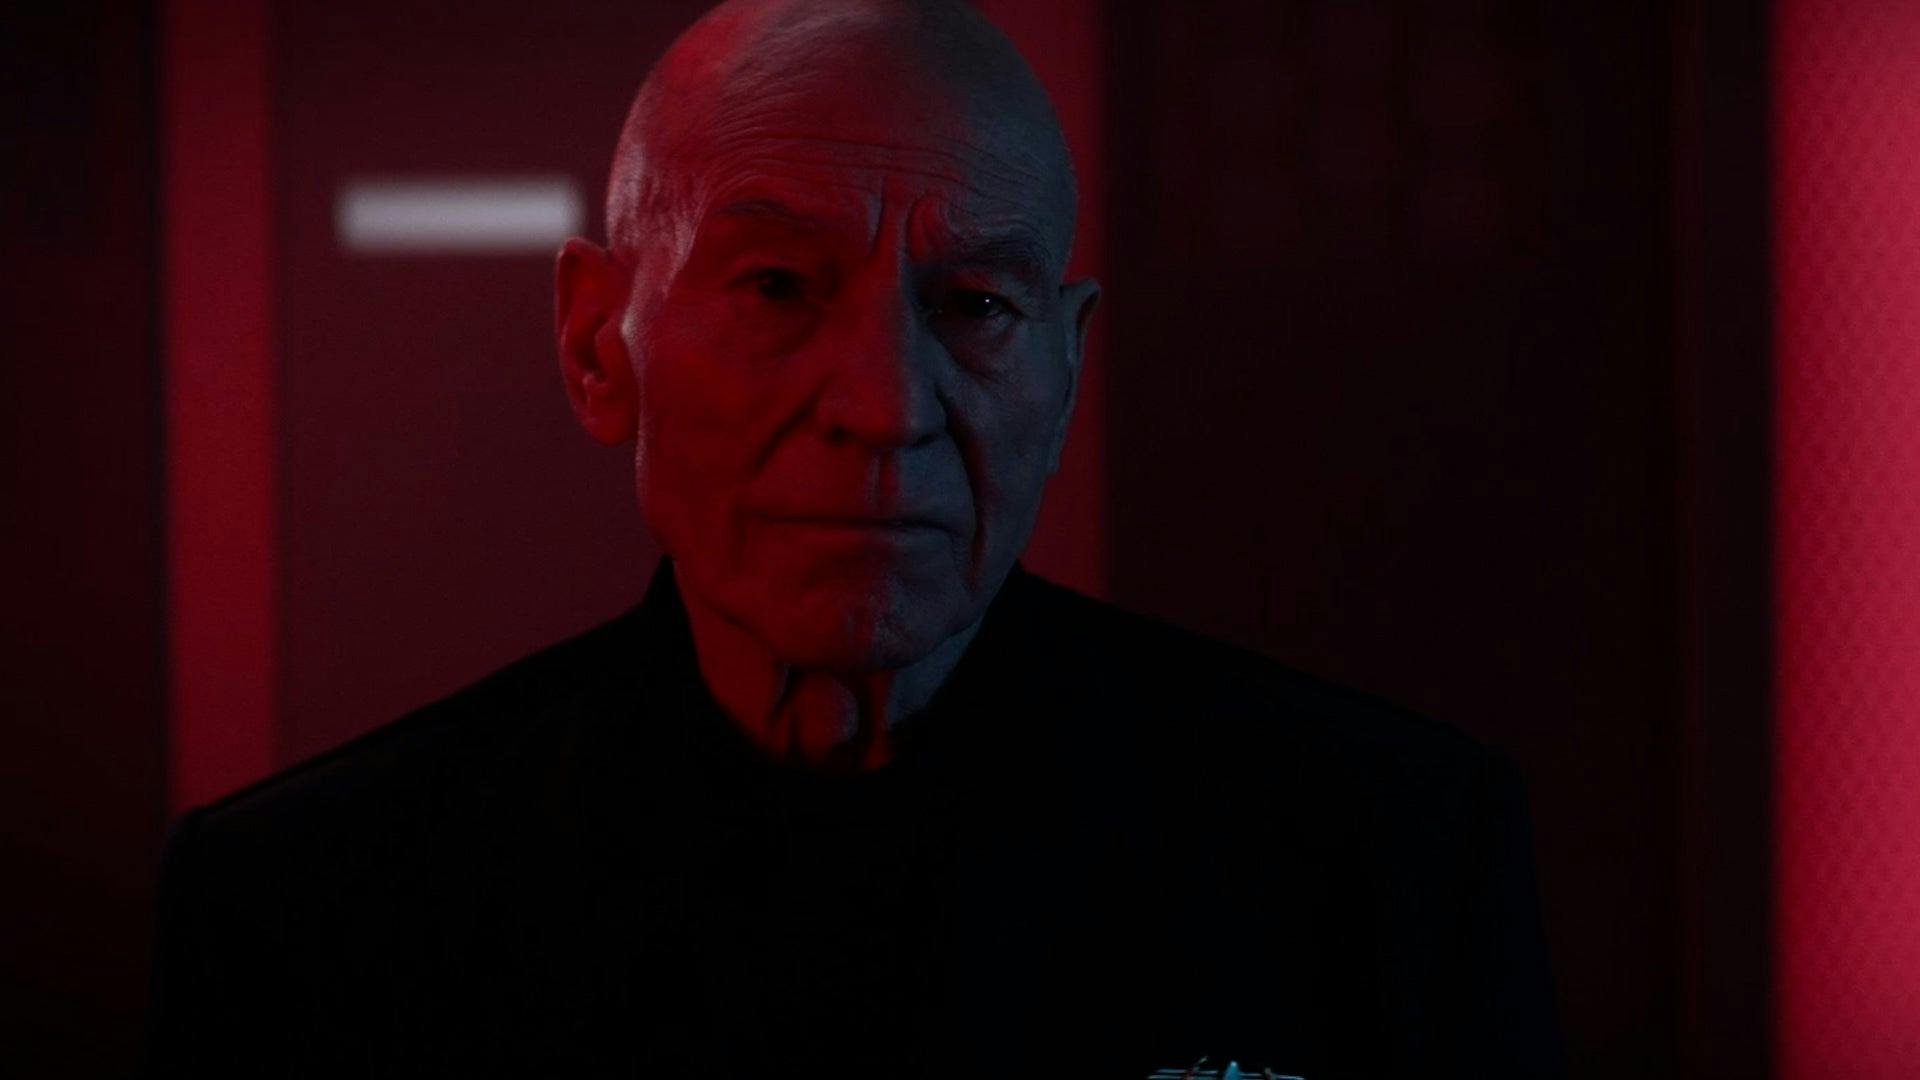 Picard, alone in crewman's quarters on the Titan, looks glumly in front of him